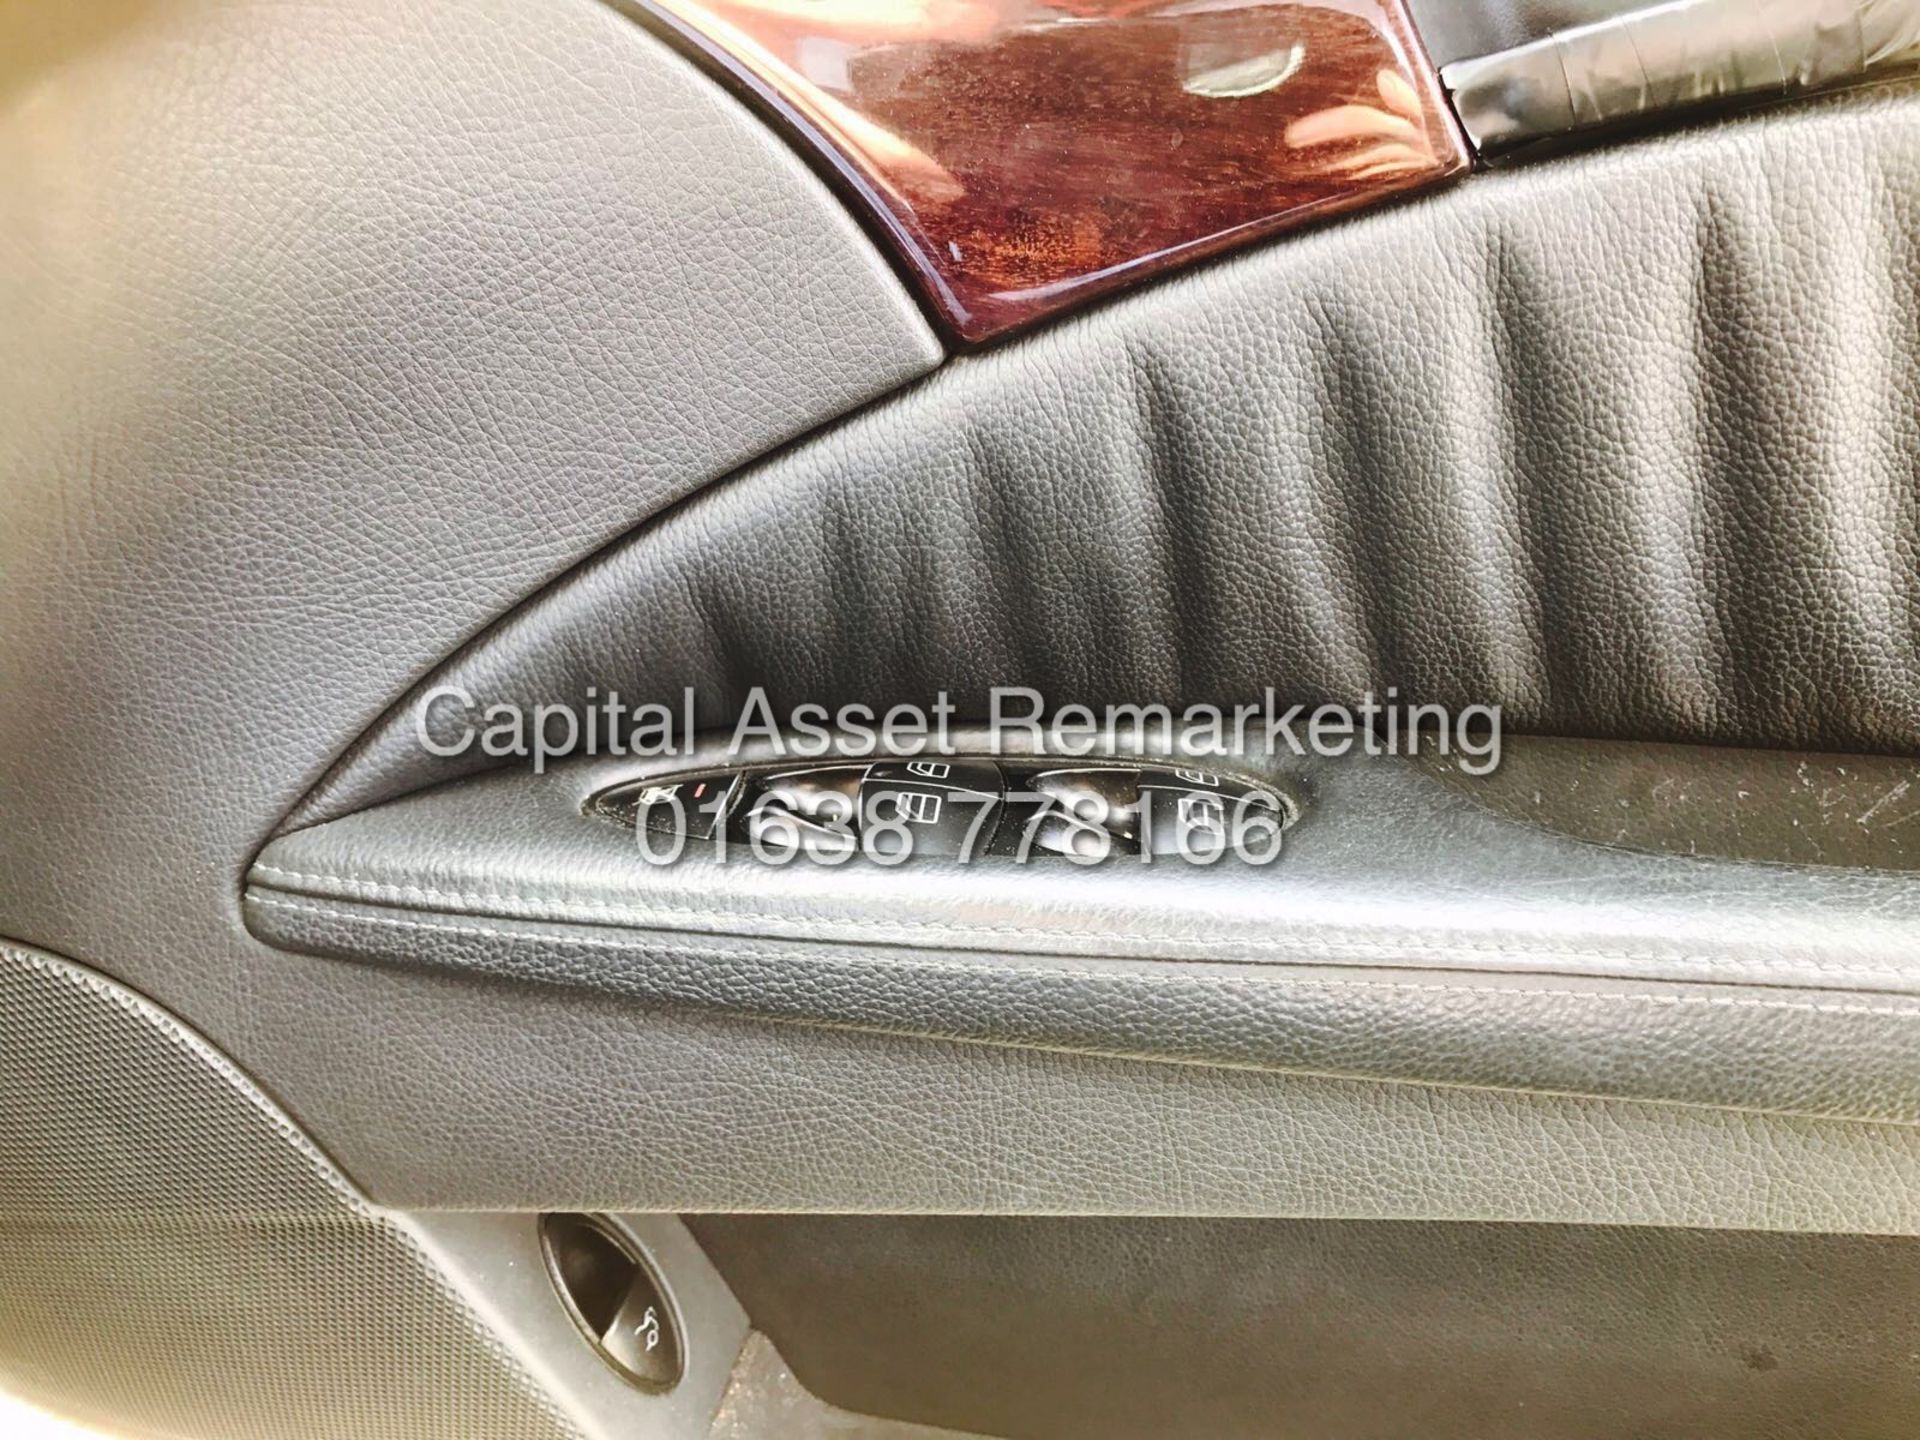 MERCEDES-BENZ E270 CDI AUTO TIP-TRONIC (2004 MODEL) LEATHER - CLIMATE - CRUISE - LEATHER - AIR CON - Image 13 of 14